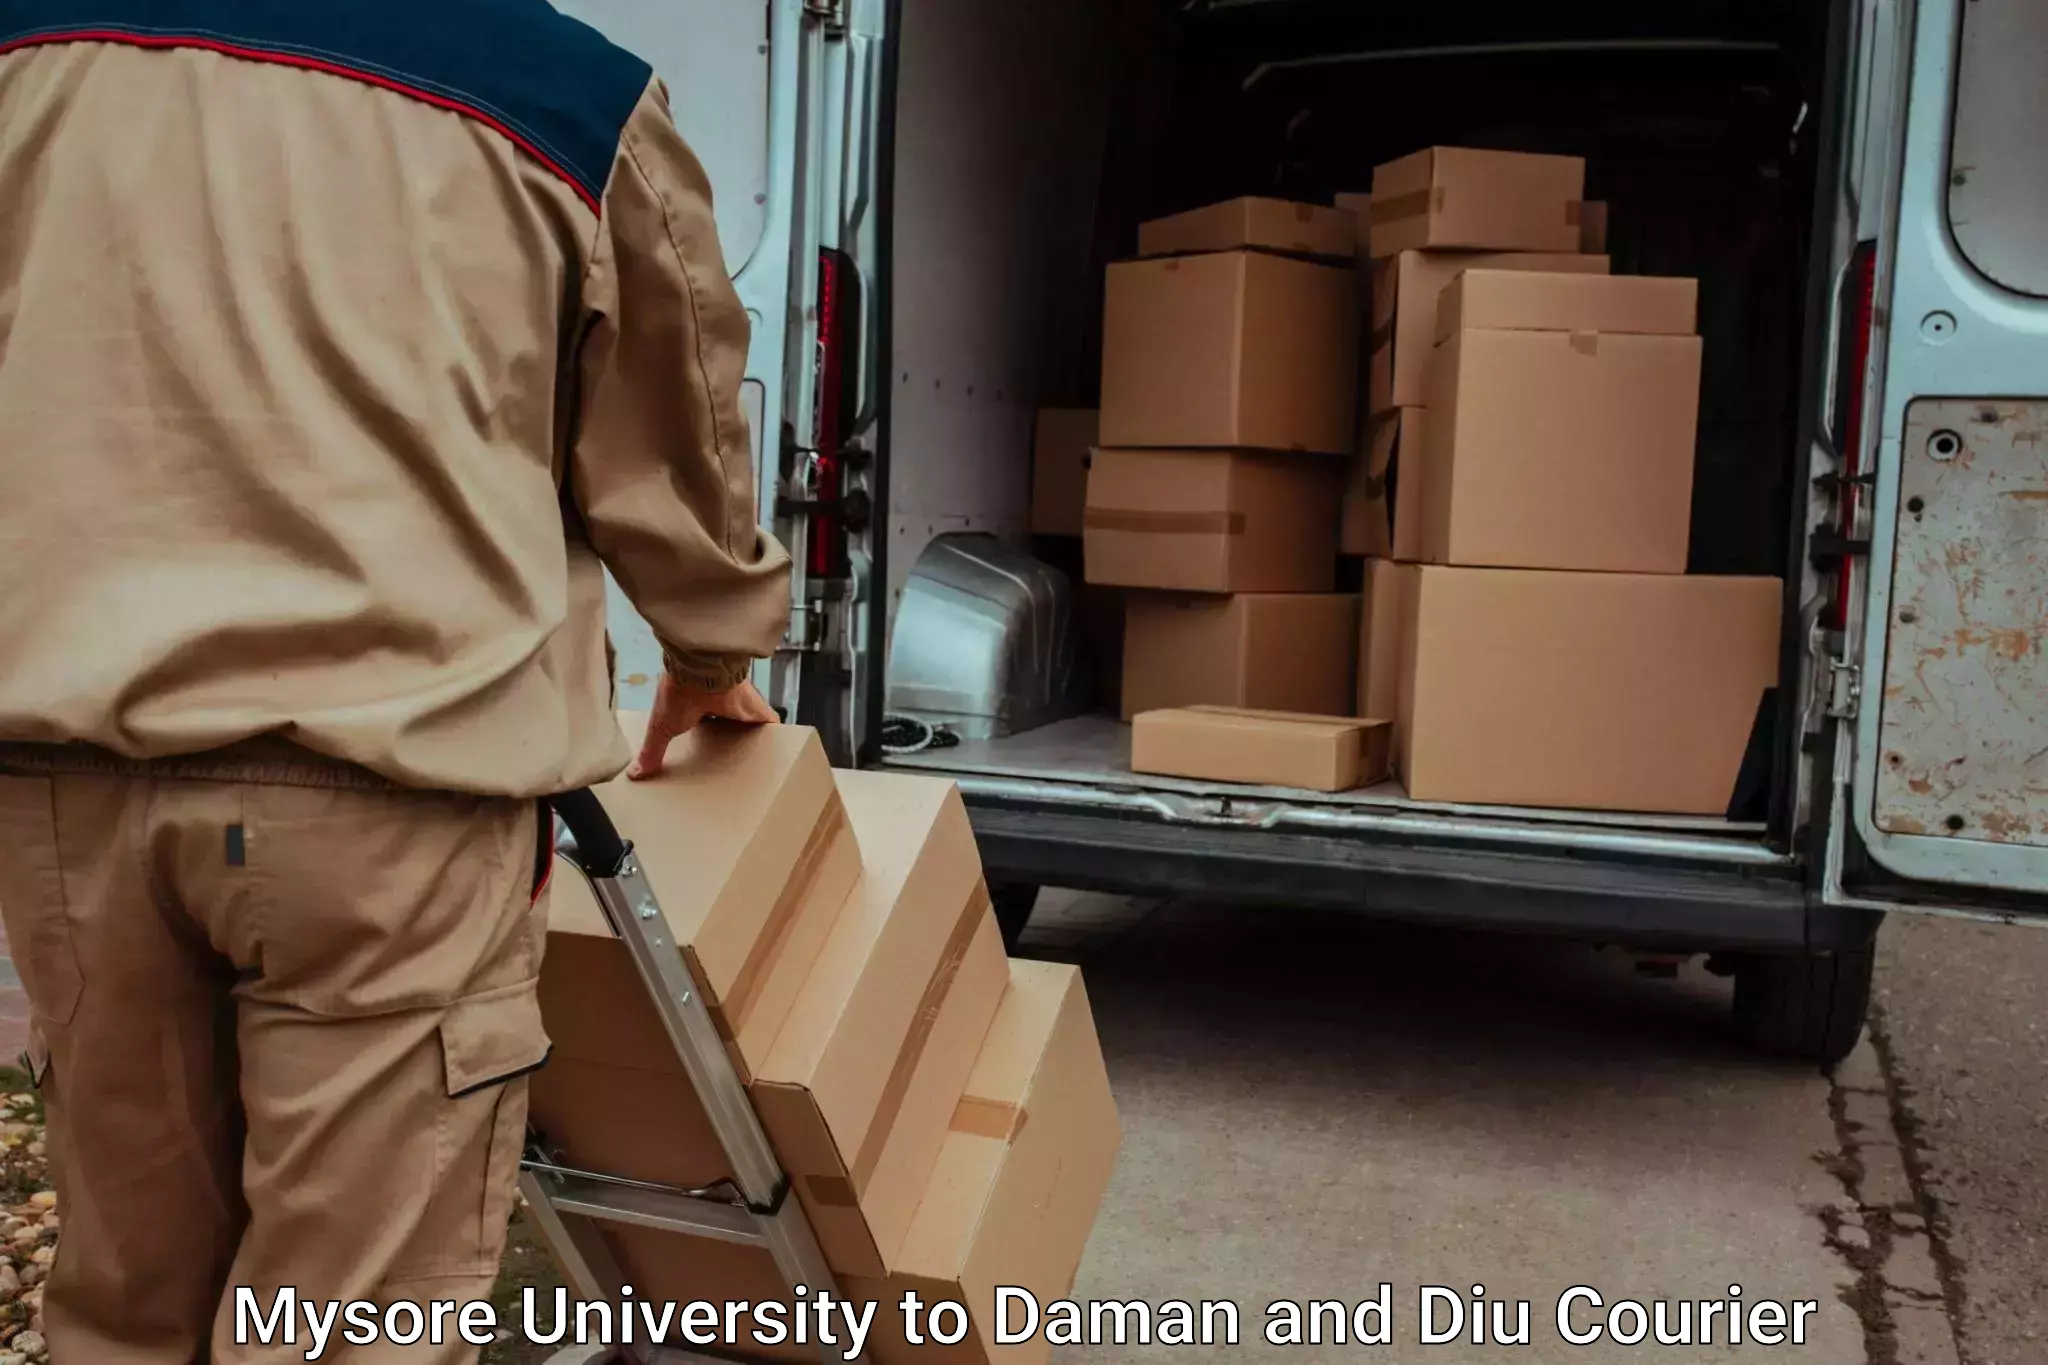 Baggage transport services in Mysore University to Daman and Diu